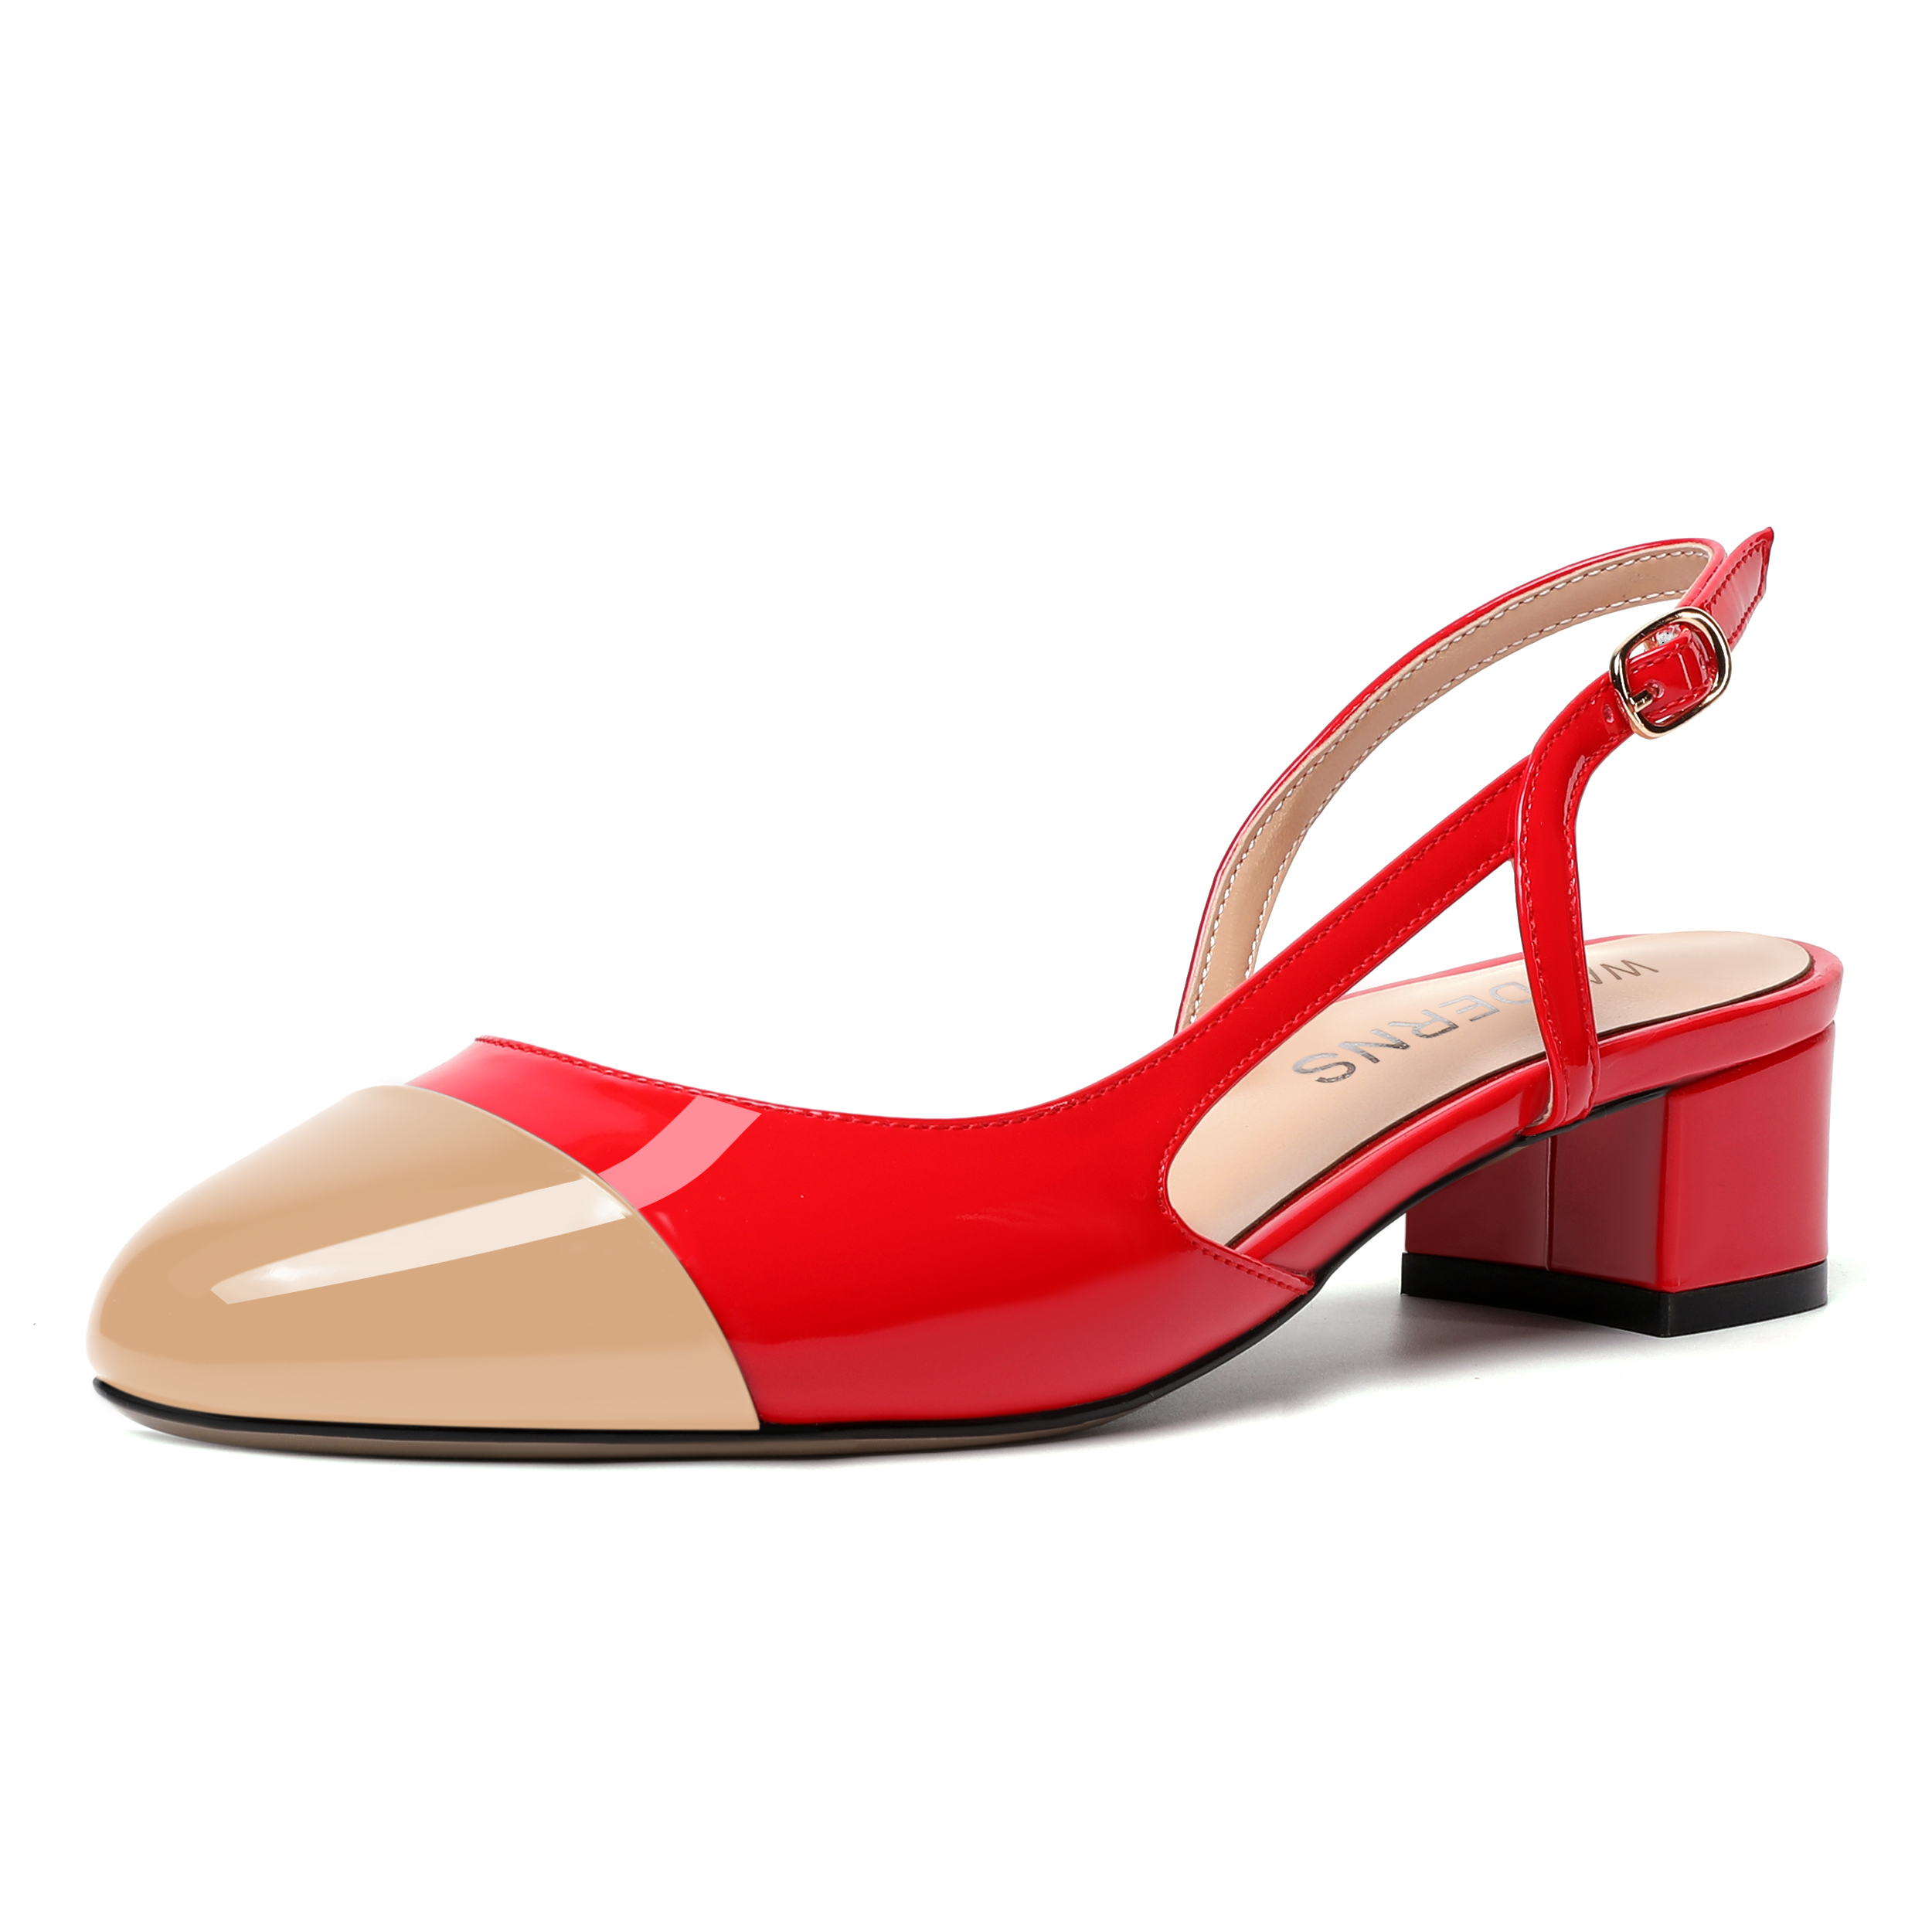 Loyalty Slingback Round Toe Patent Buckle Pumps Heels